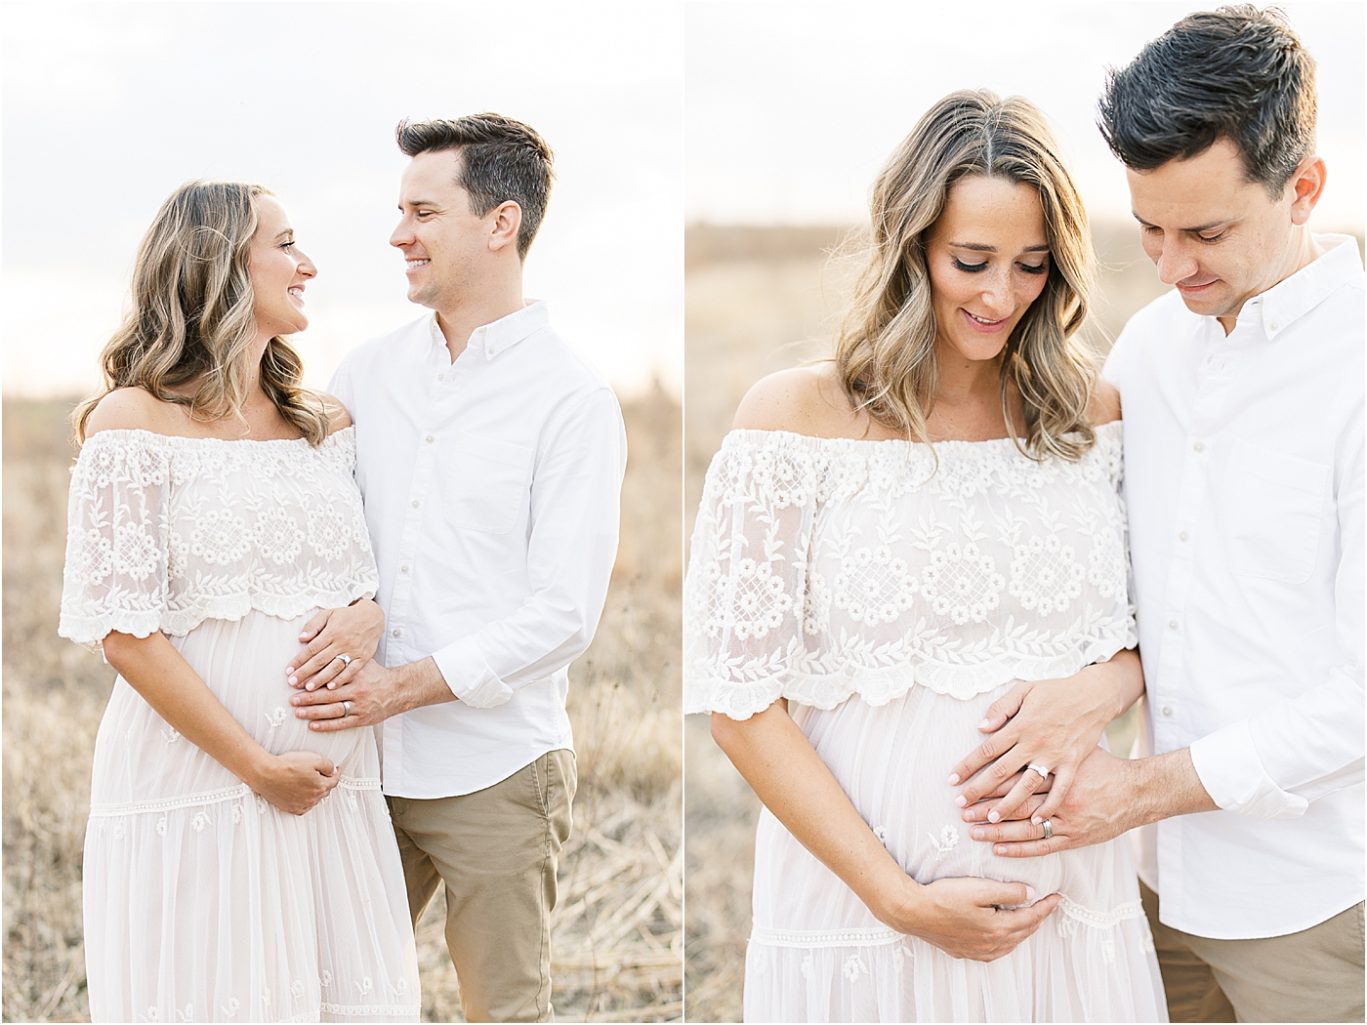 Mom and Dad to be standing together for maternity photos. Photos by Broad Ripple IN Maternity Photographer, Lindsay Konopa Photography.